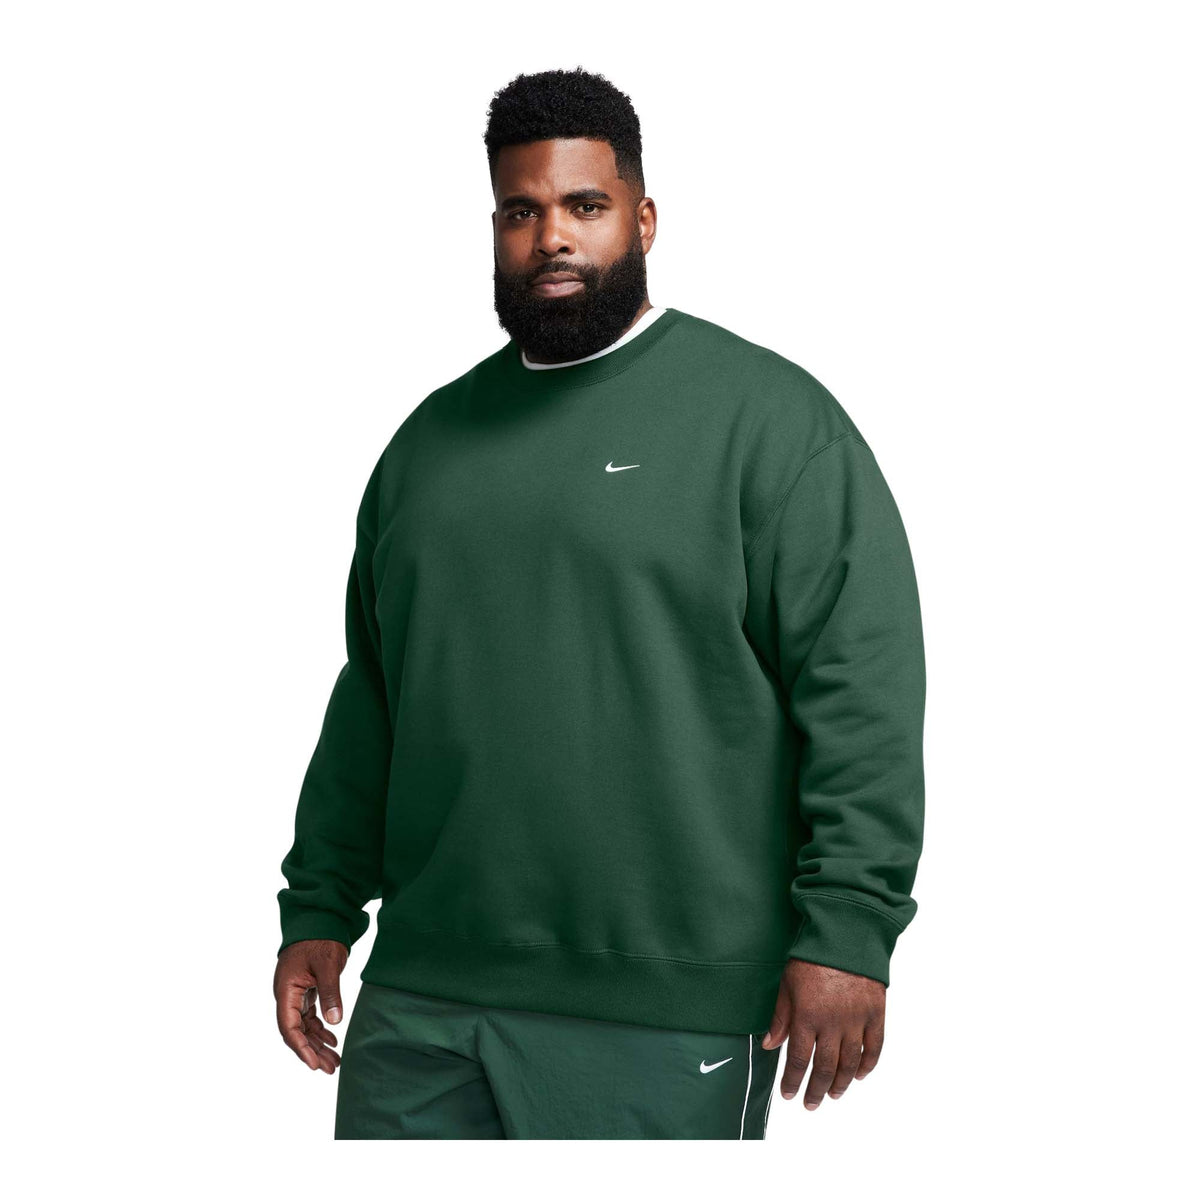 nike elite sign in store in houston locations list Men's Fleece outfits